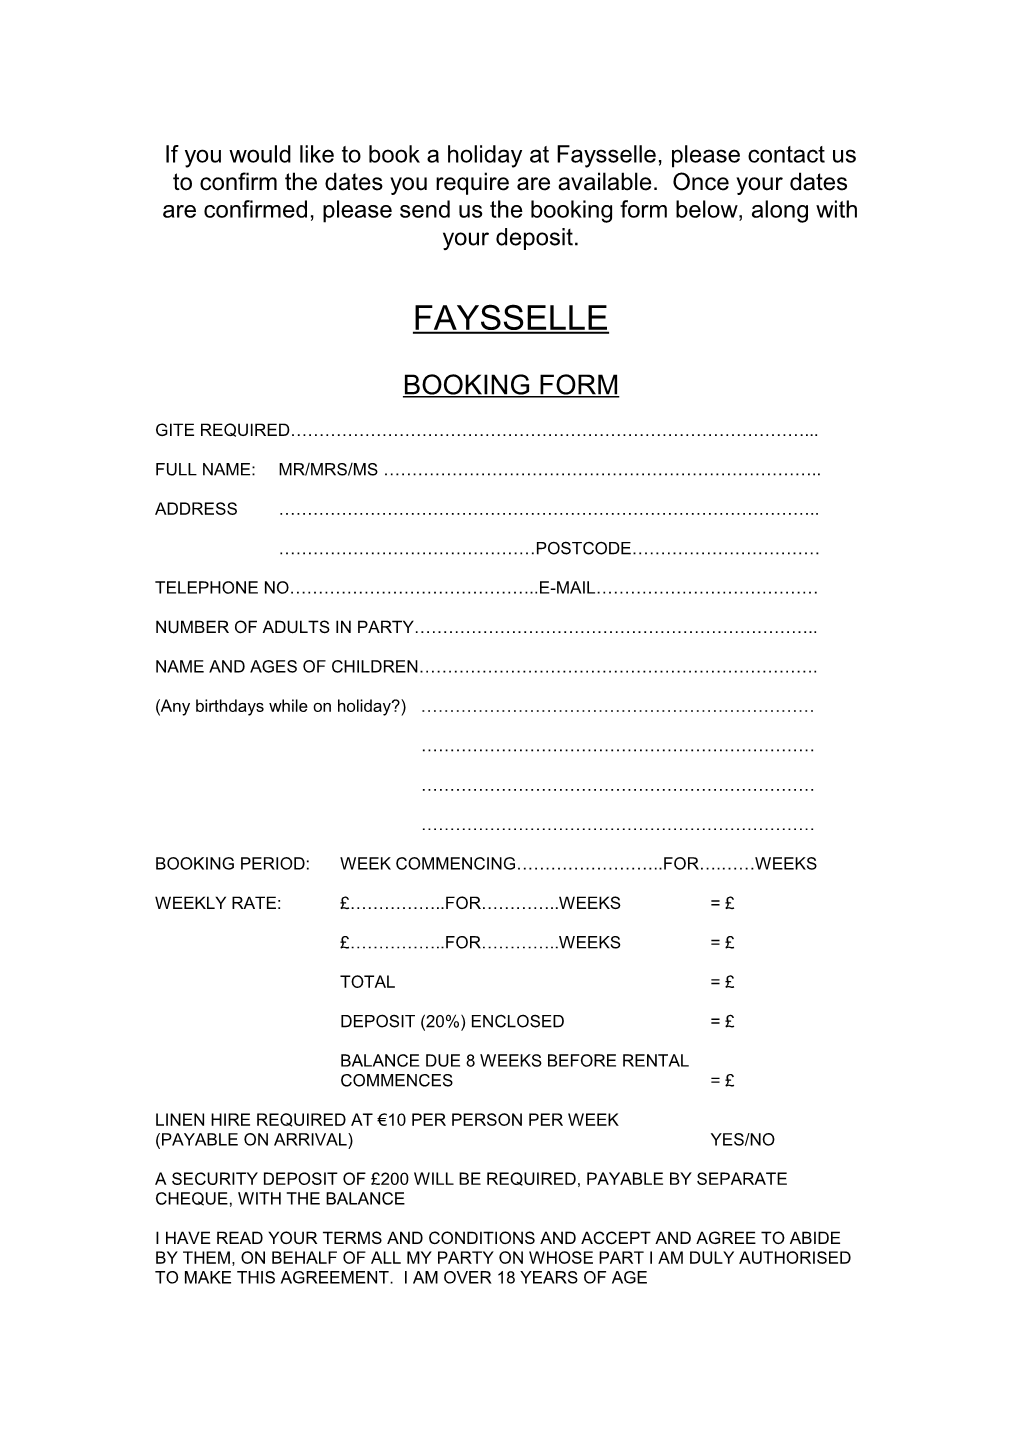 If You Would Like to Book a Holiday at Faysselle, Please Contact Us to Confirm the Dates